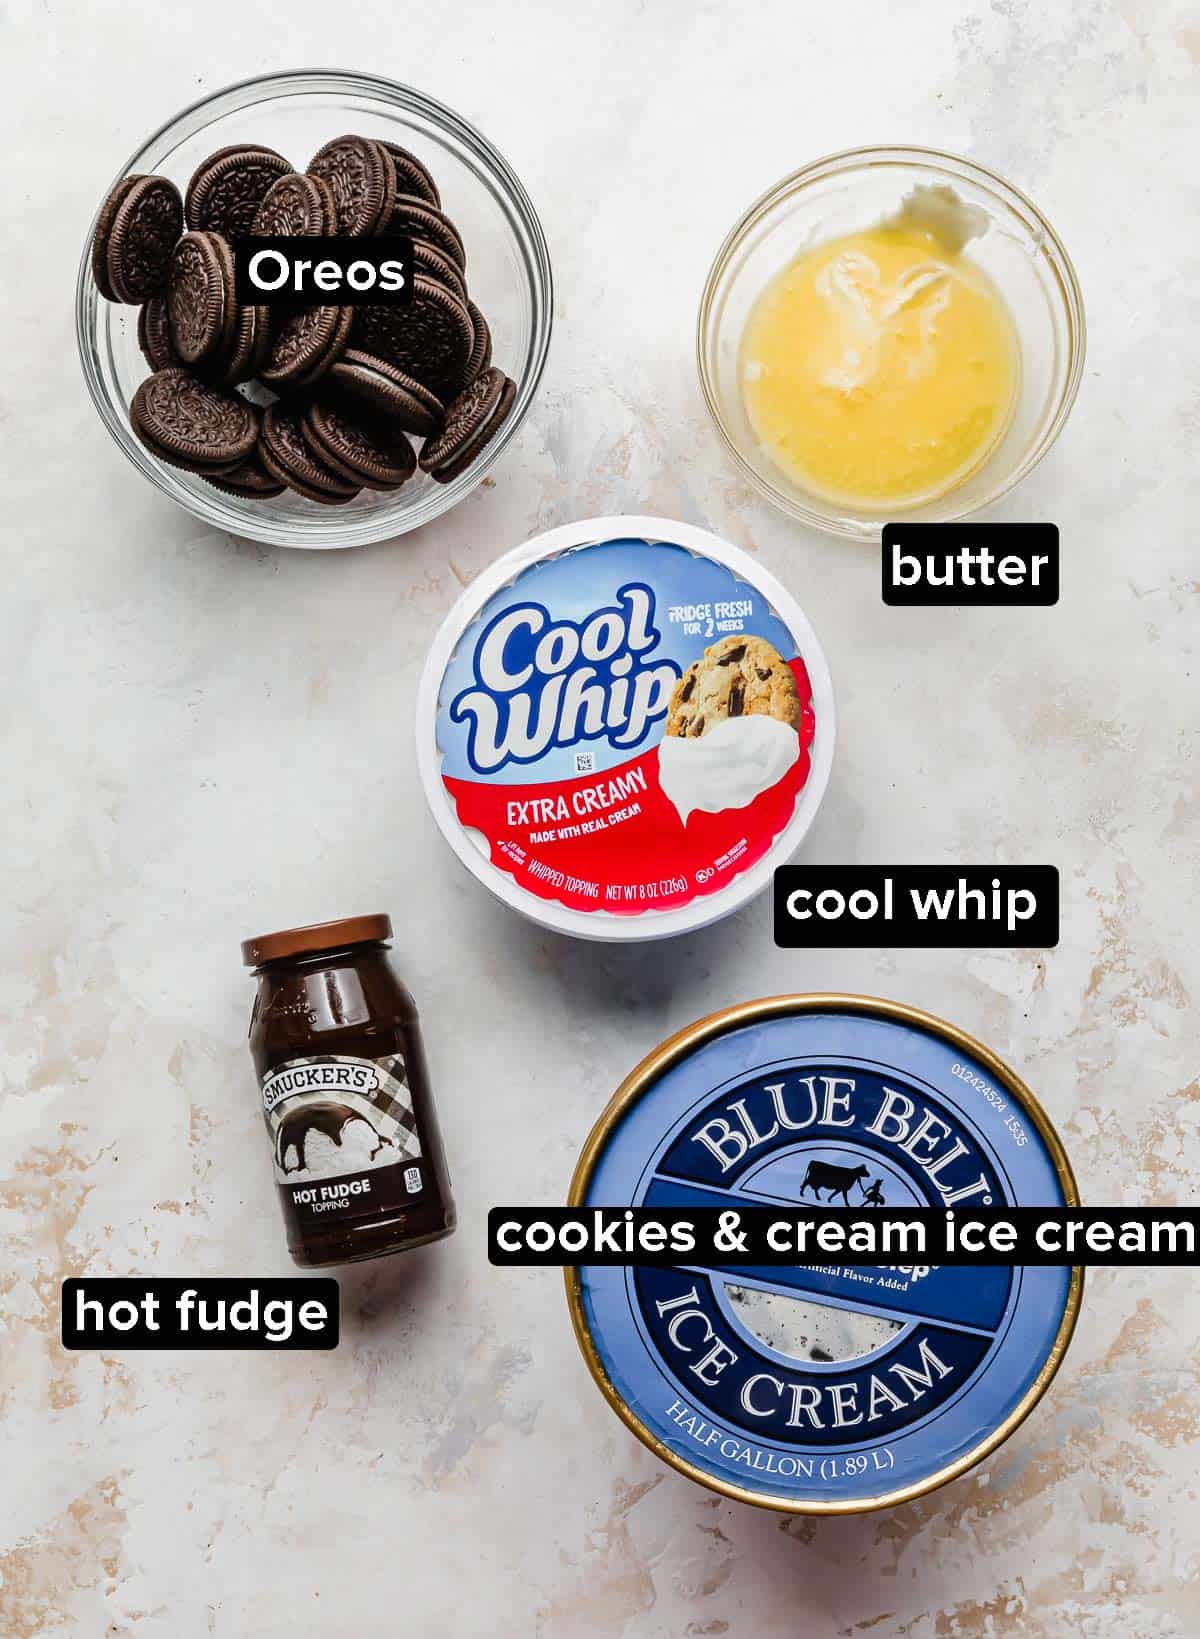 Oreo Ice Cream Cake ingredients in glass bowls: Oreos, butter, oreo ice cream, cool whip, and hot fudge.